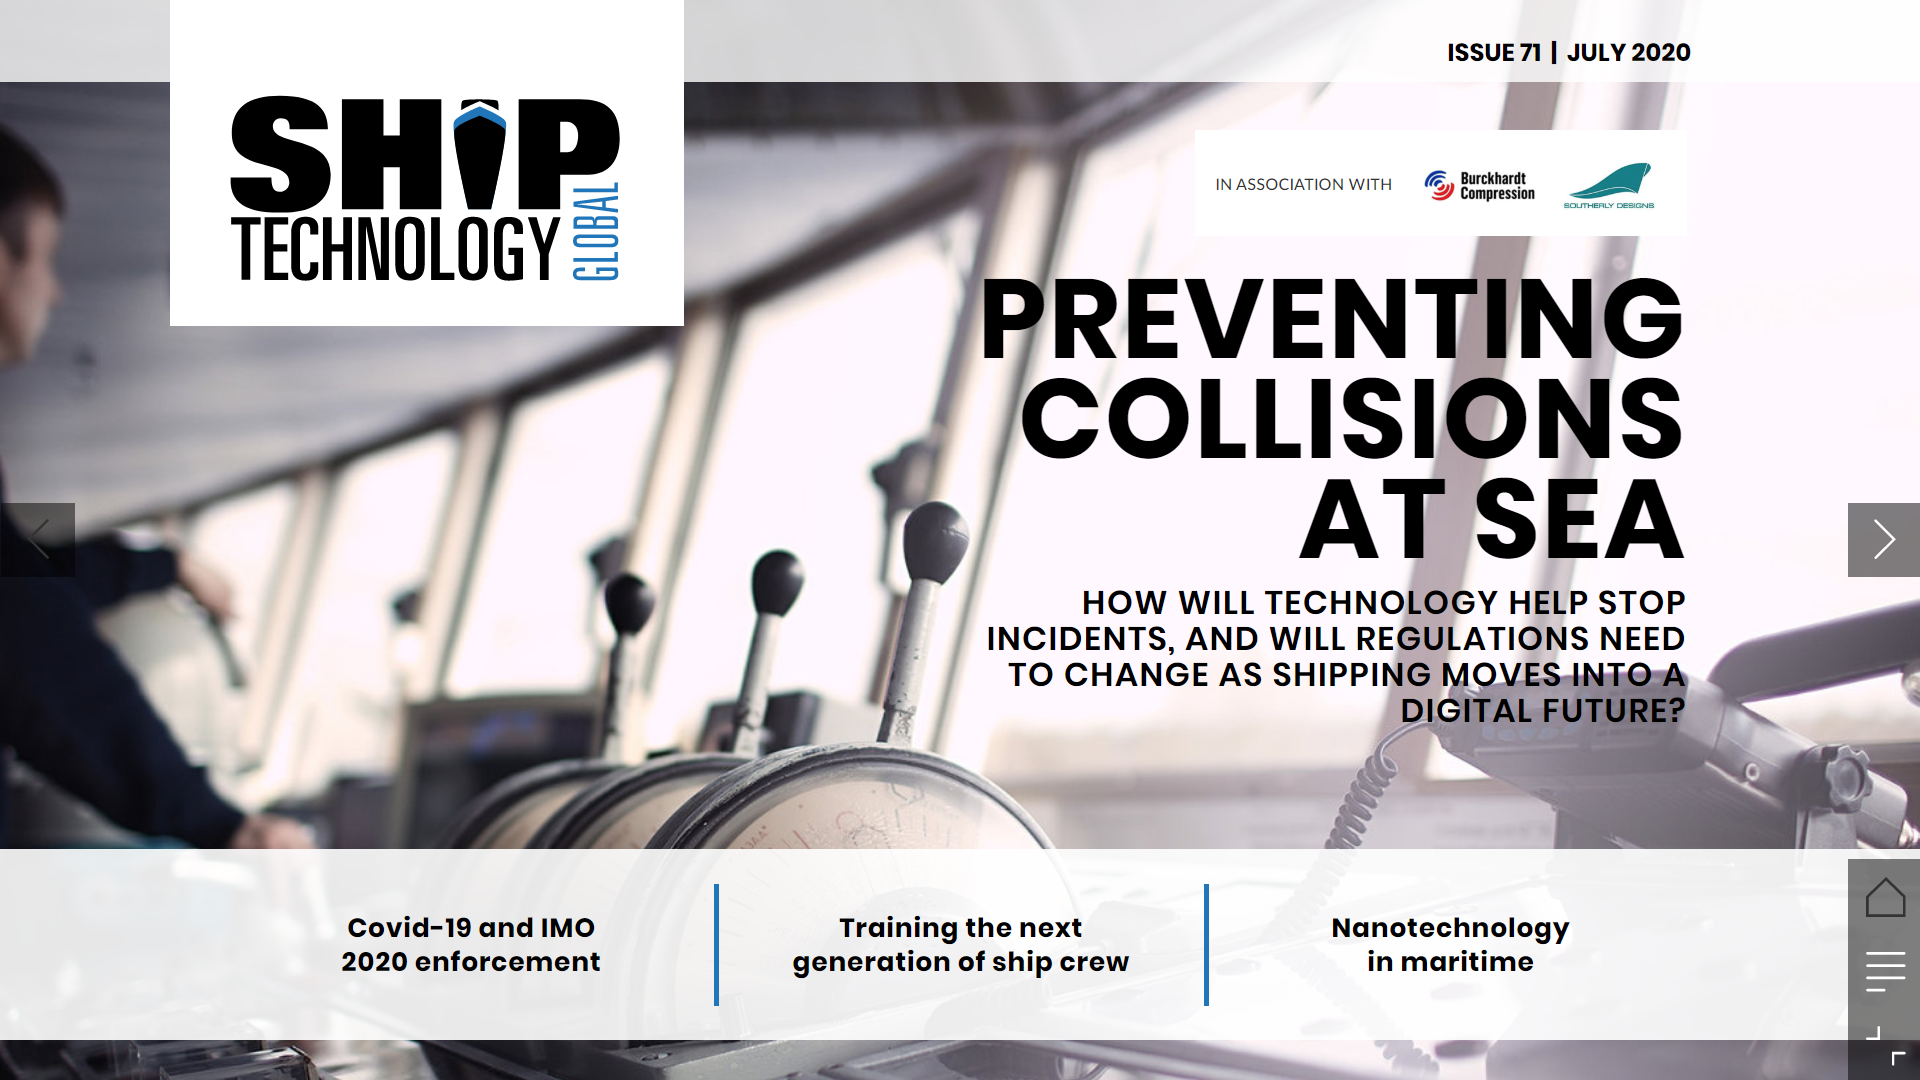 When ships collide: Ship Technology Global Issue 71 is out now